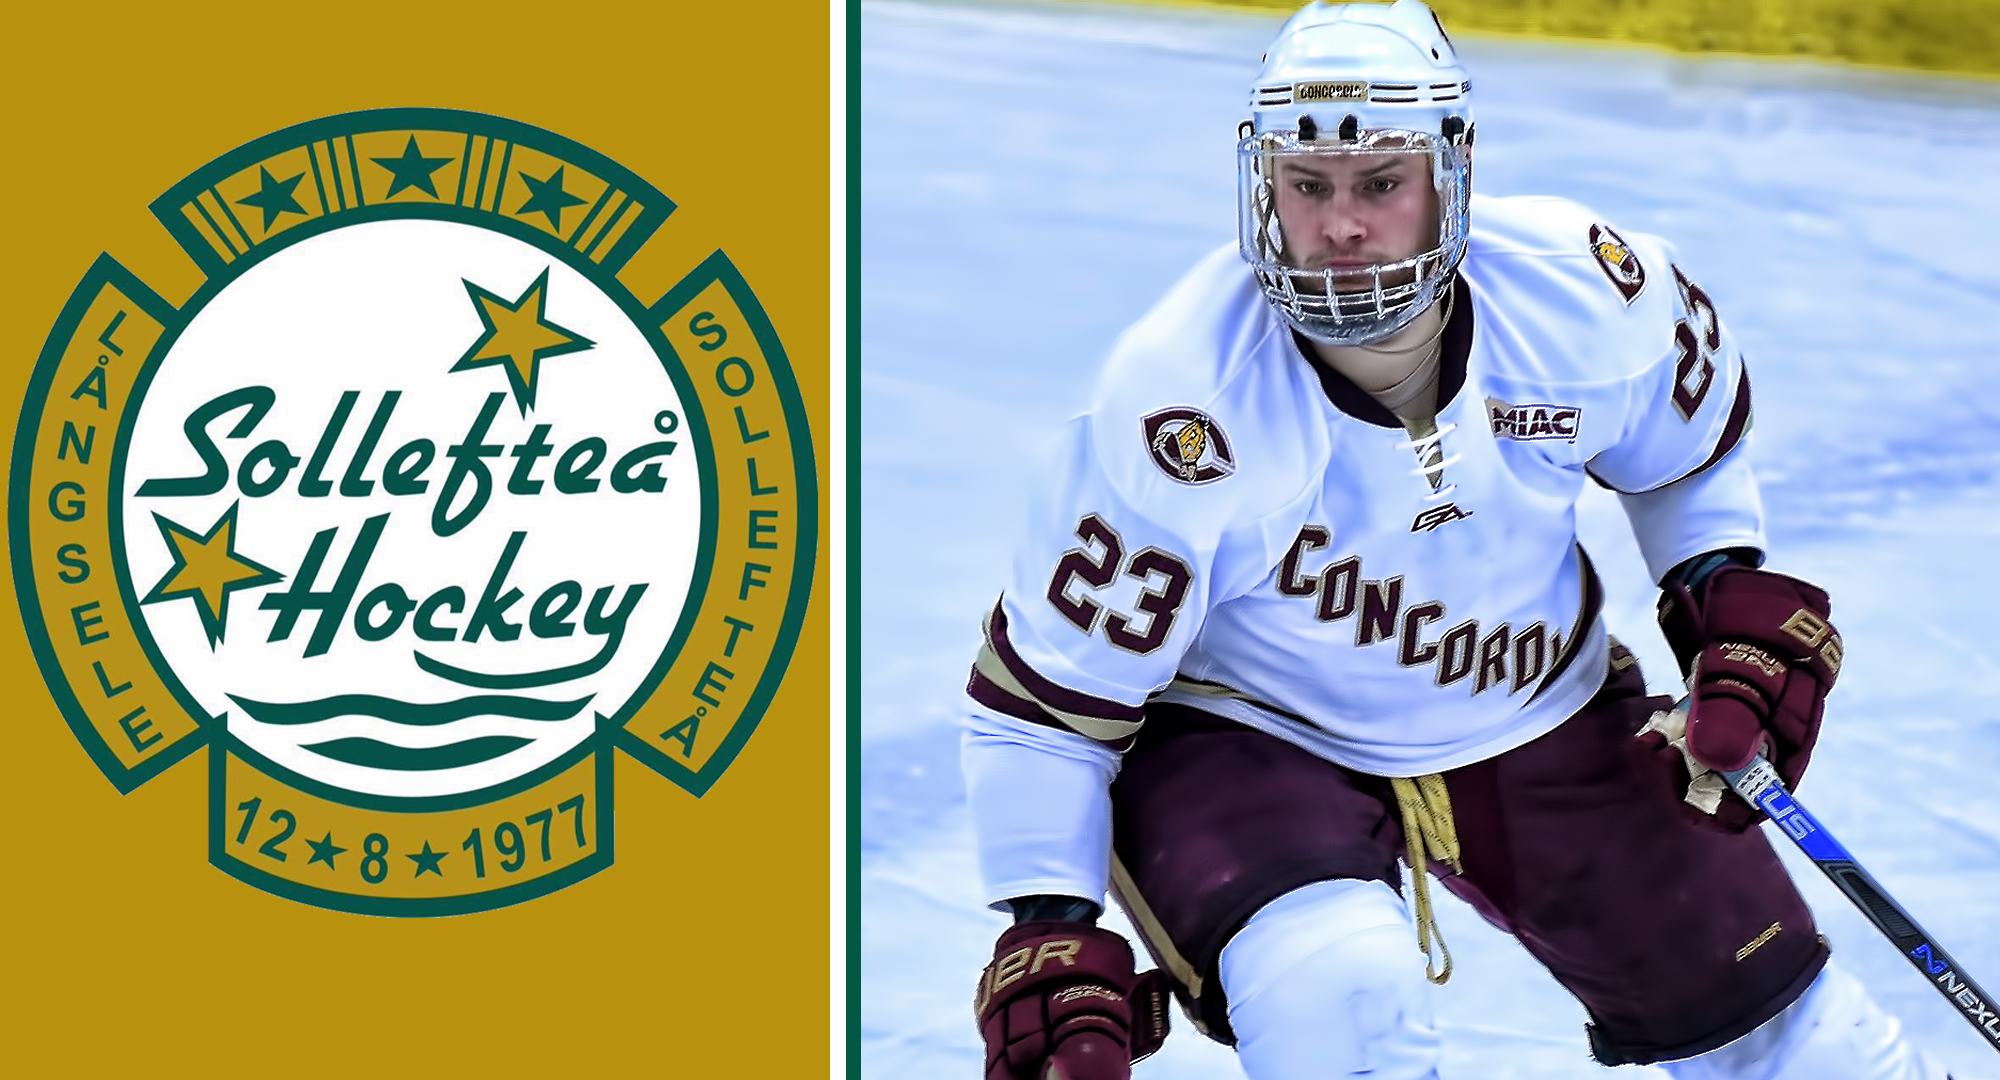 Former Cobber men's hockey player Aaron Ryback signed a professional contract with Swedish Division 2 team Solleftea HK.